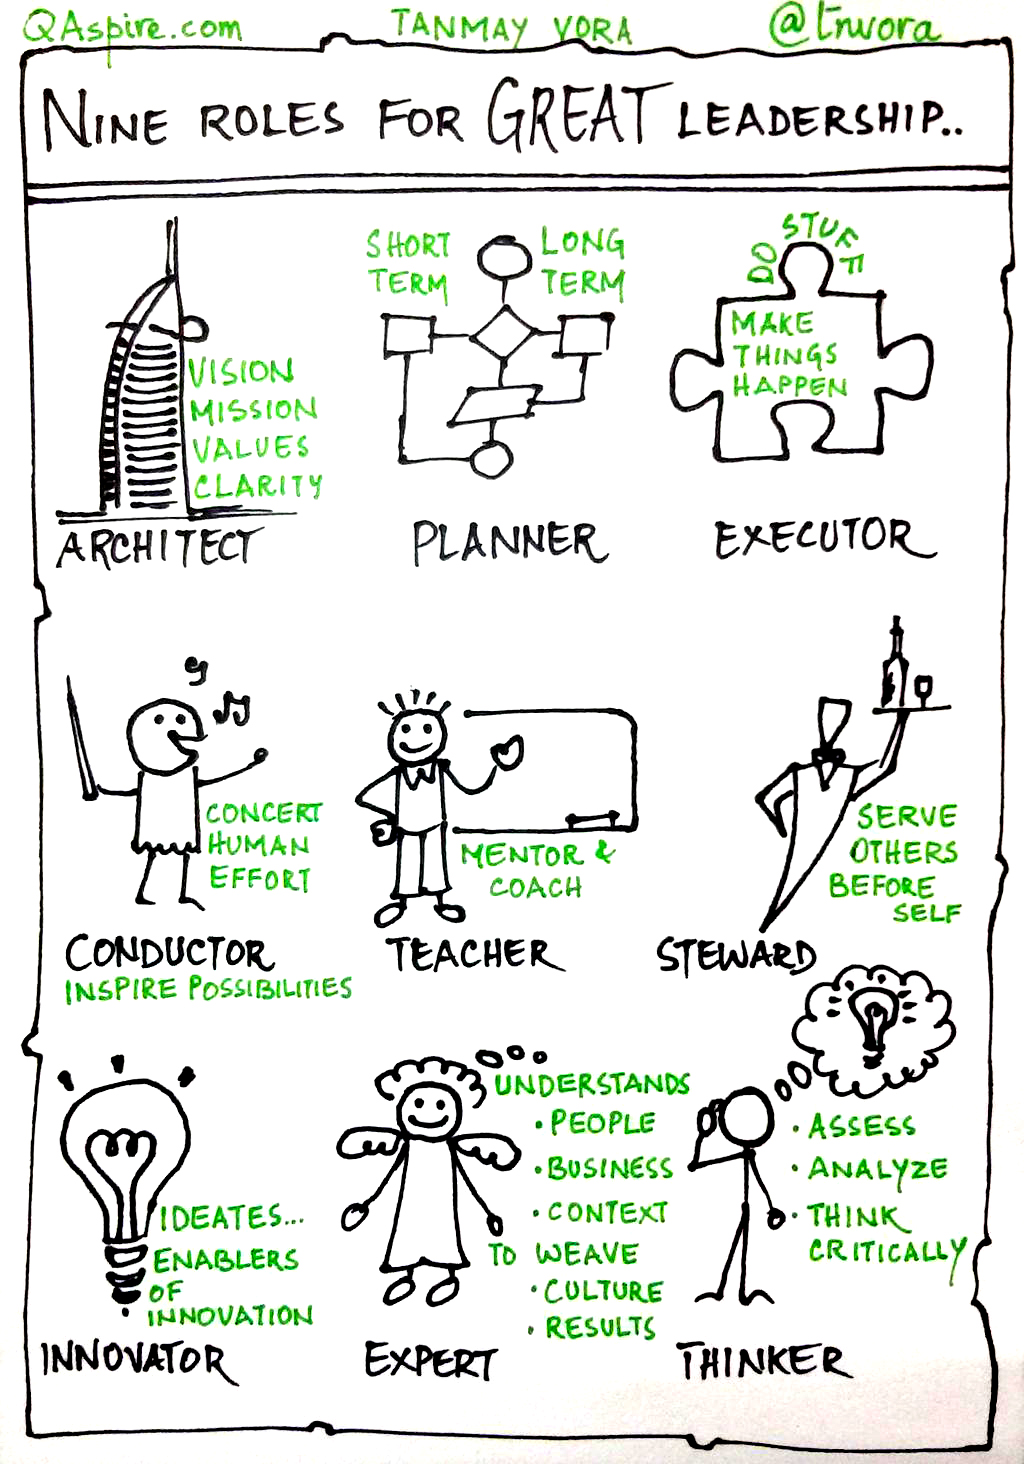 Sketch Note: 9 Roles of a Great Leader